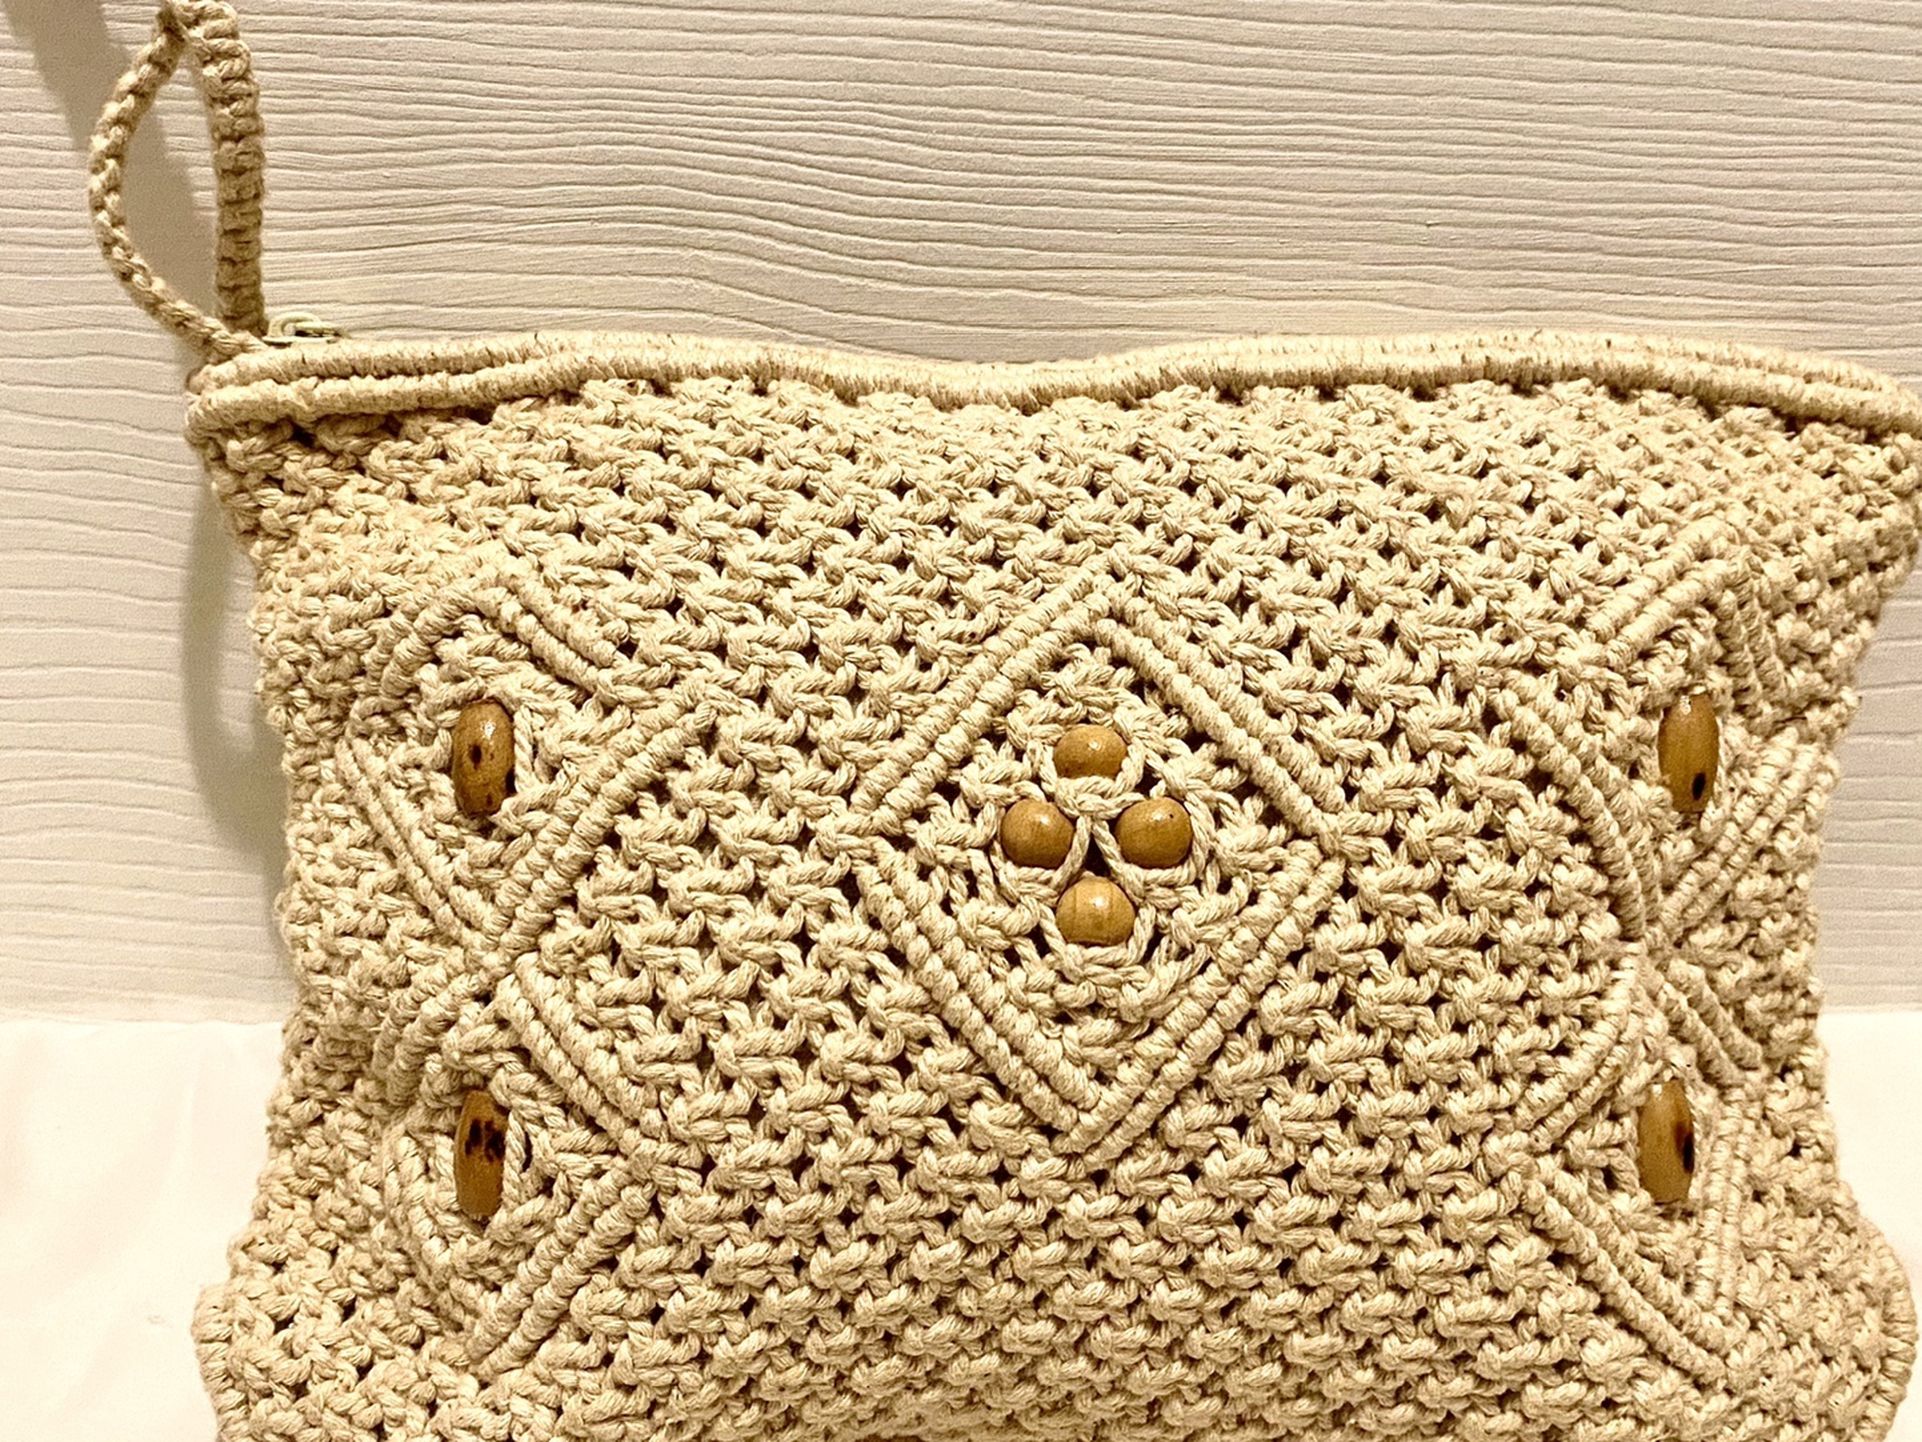 Vintage Handmade Crochet Purse With Wooden Jewels